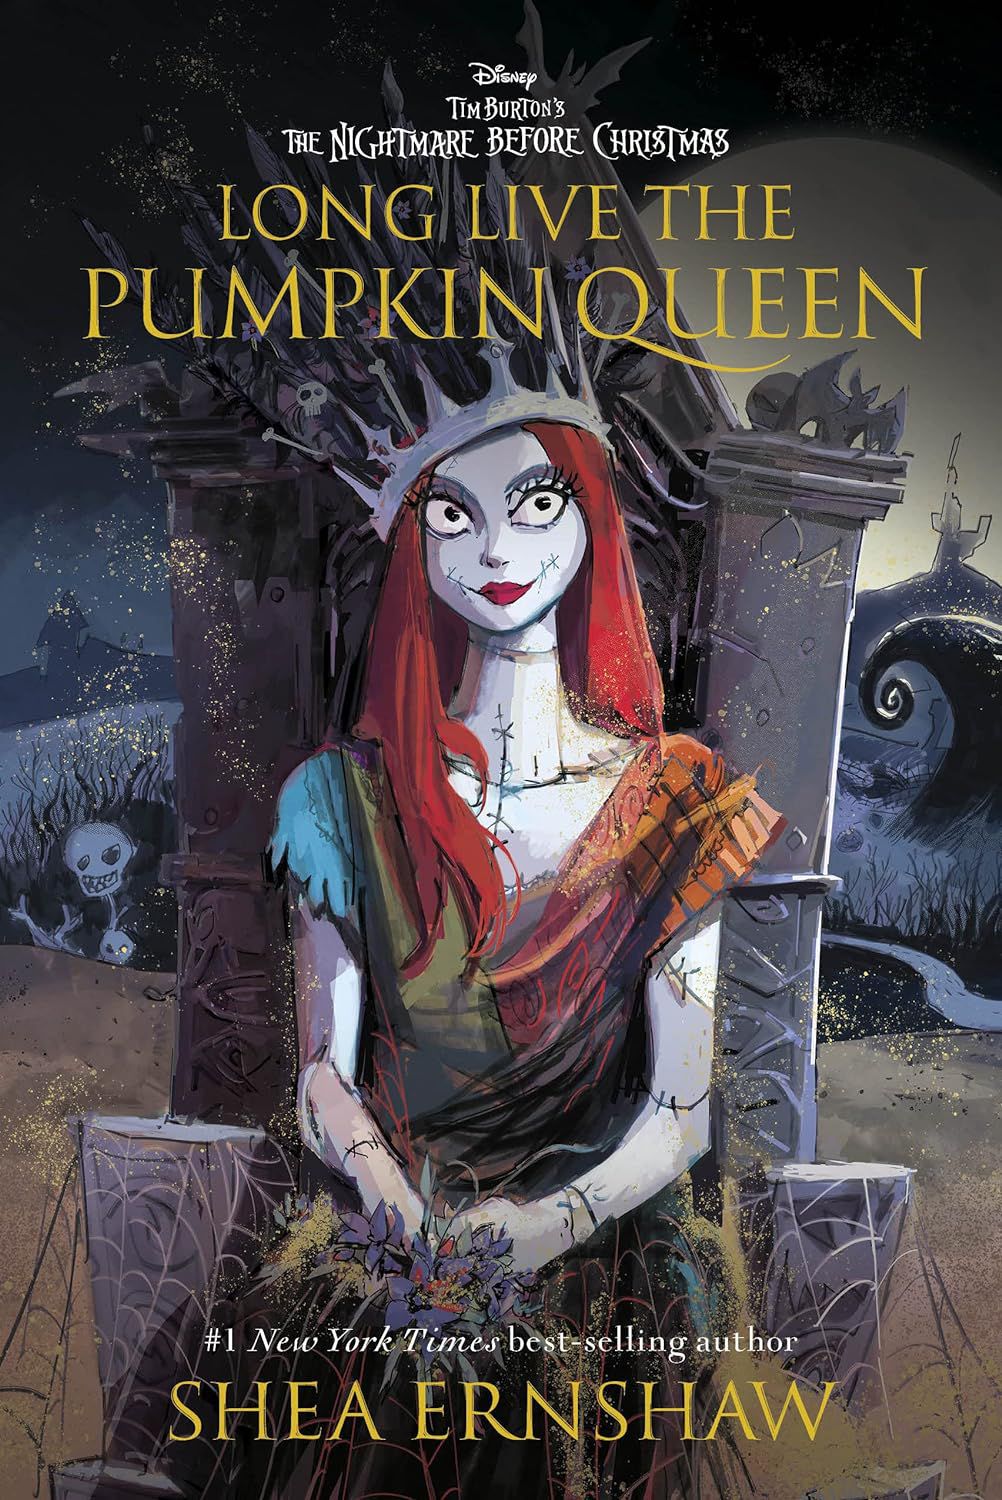 Sally from The Nightmare Before Christmas sitss in a tomb-stone-like throne wearing a crown on the cover of Long Live the Pumpkin Queen by Shea Ernshaw